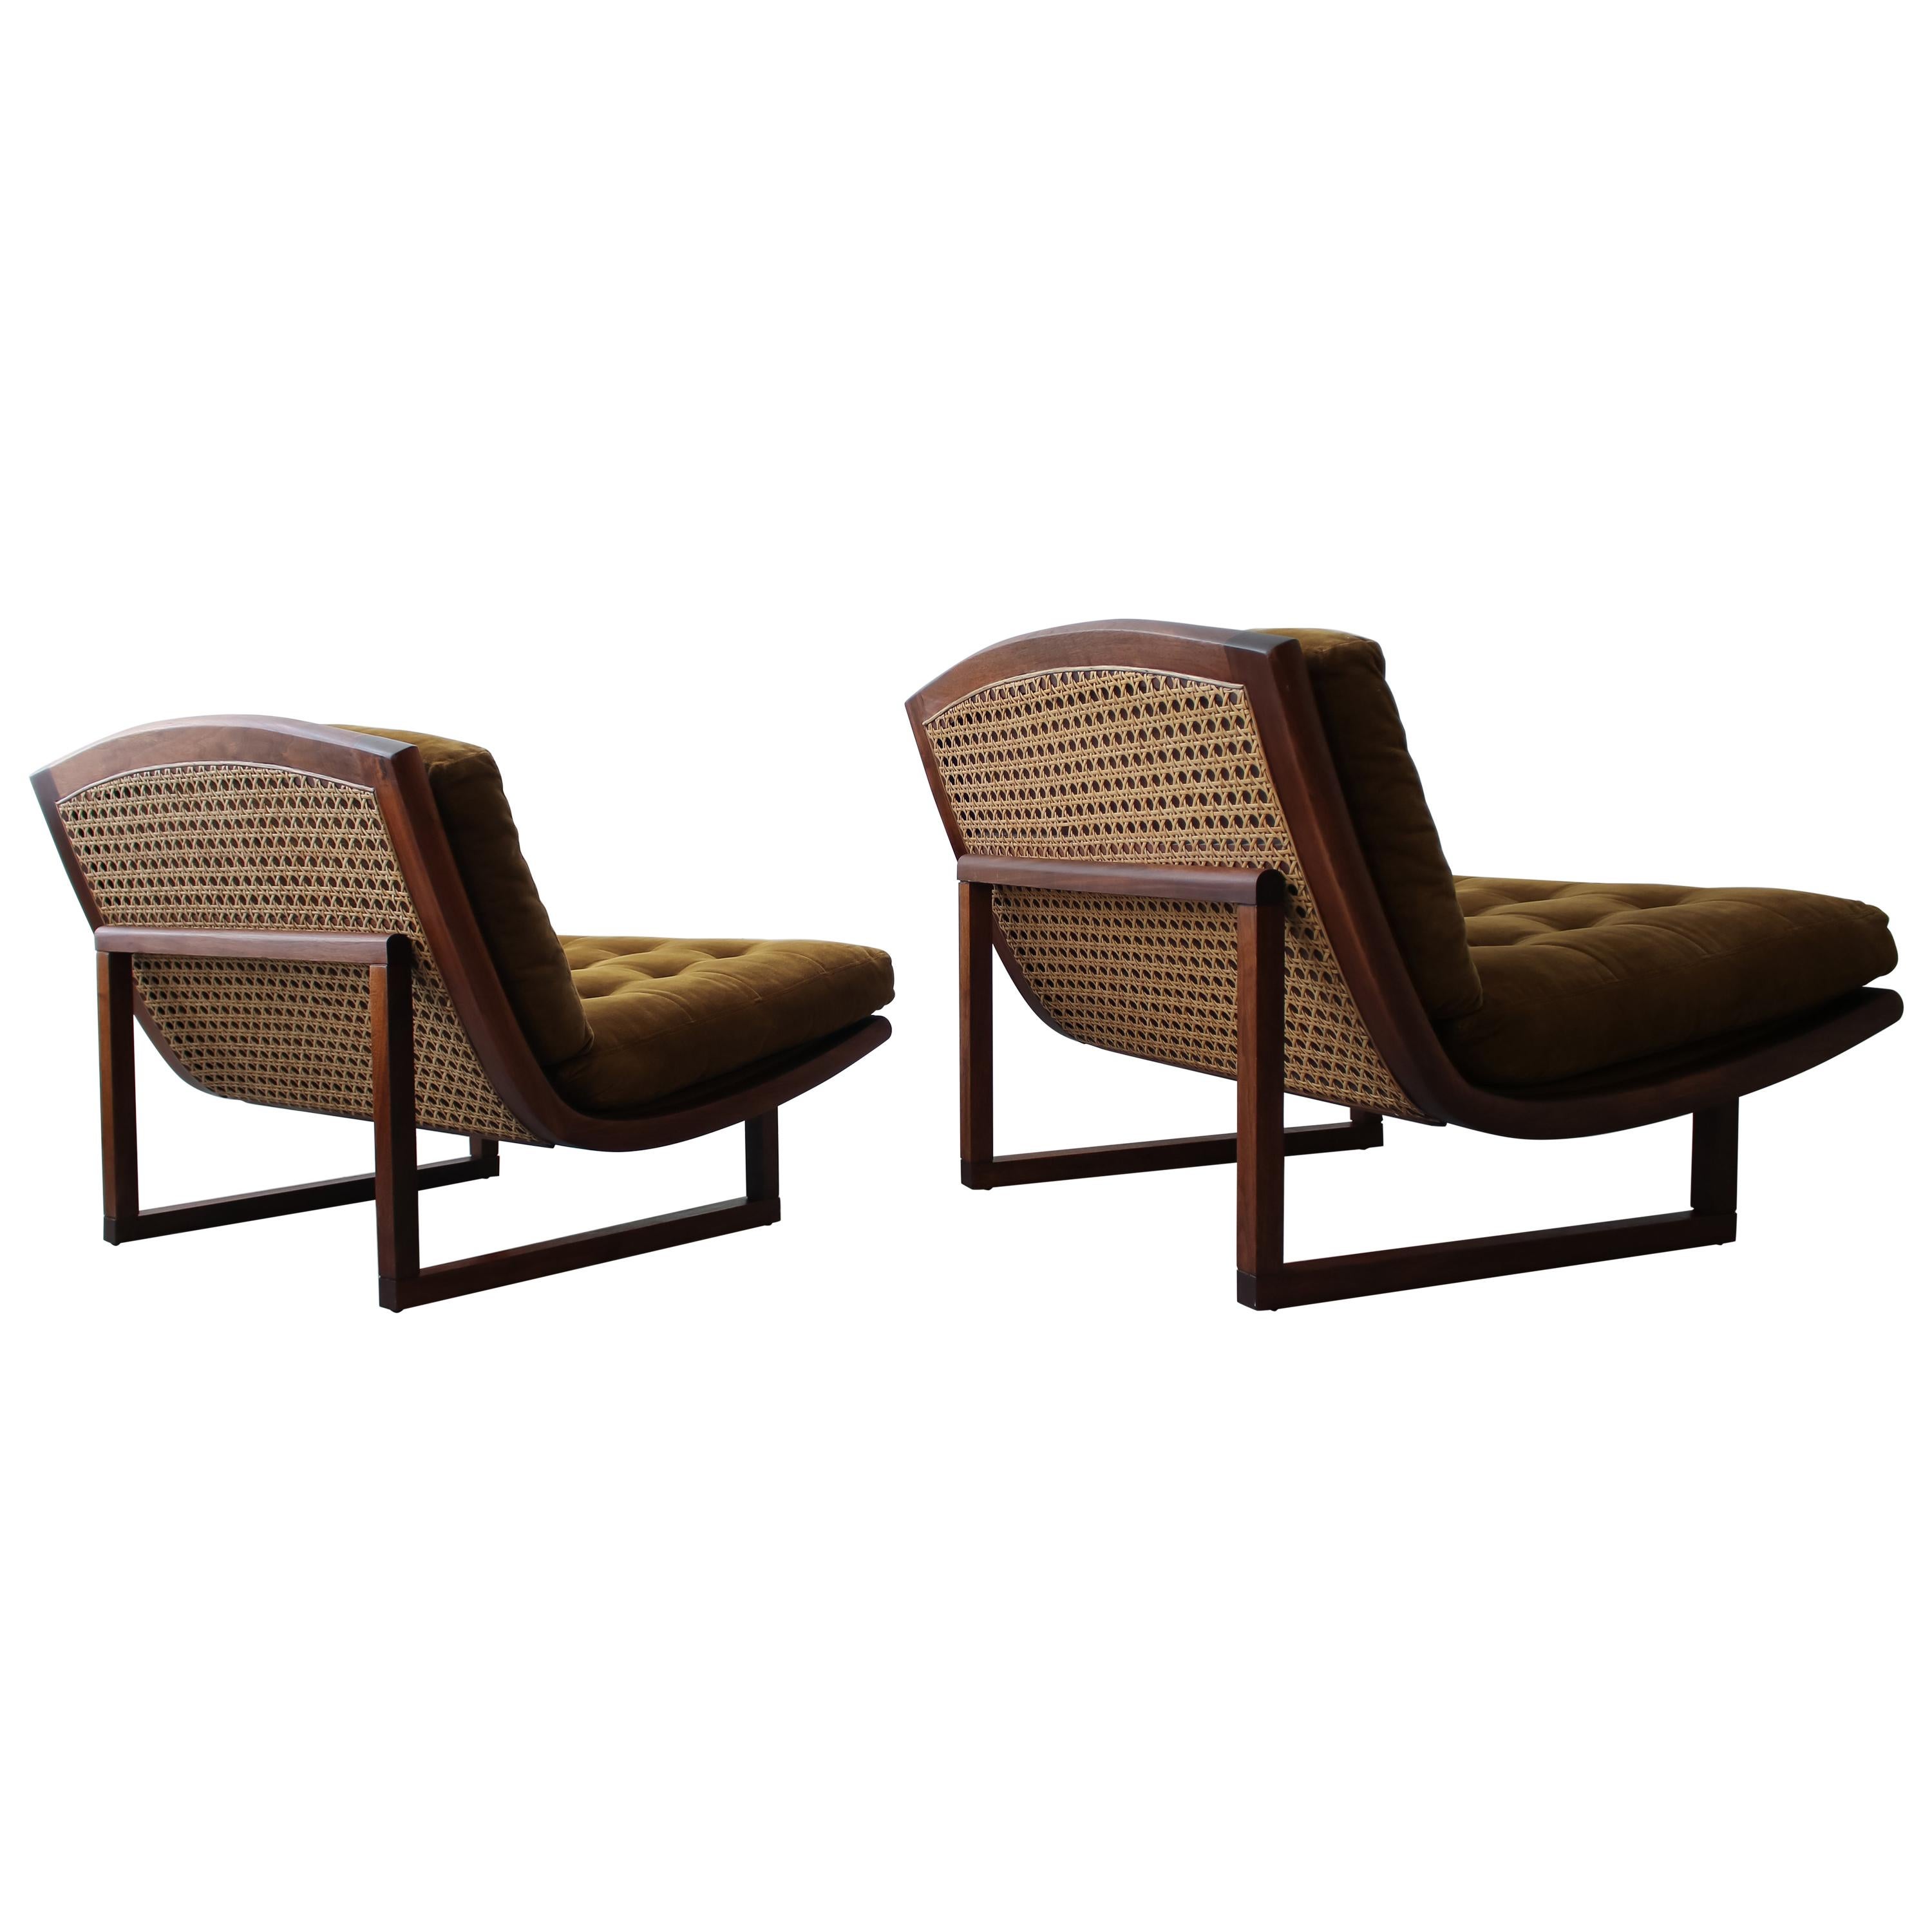 Pair of Midcentury Walnut and Cane Armless Scoop Lounge Chairs